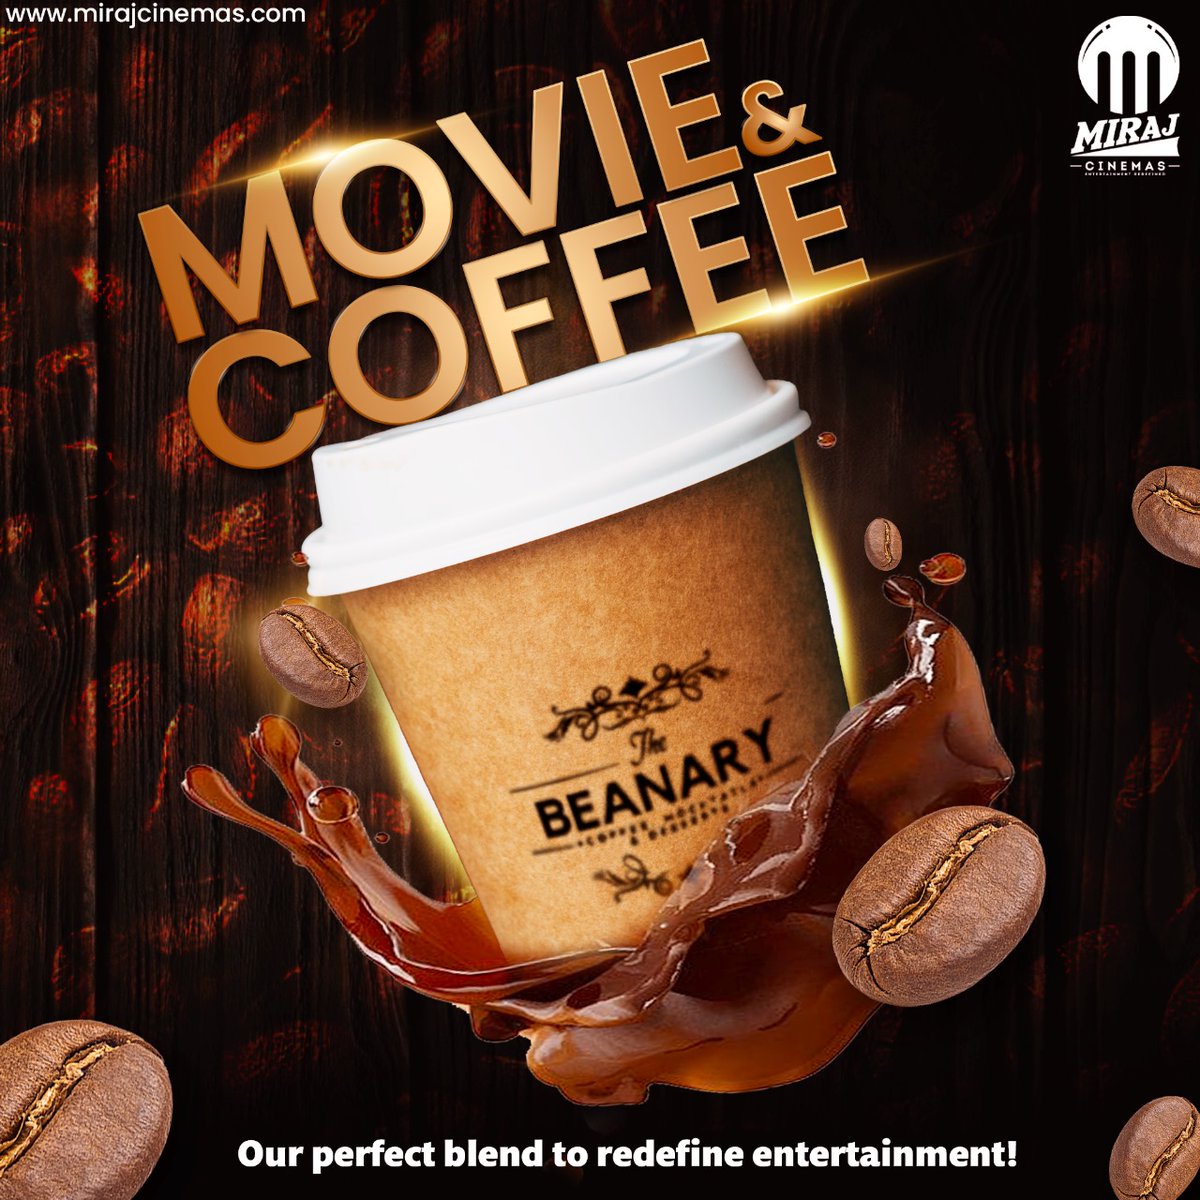 Experience the perfect blend of movie magic and coffee delight at #MirajCinemas! ☕🎥
Let The Beanary's rich flavours complement every scene, redefining your entertainment experience. 
.
.
#MovieAndCoffeePerfection  #CoffeeLovers #TheBeanary #MovieTimeTreat #Coffee #BrewCoffee